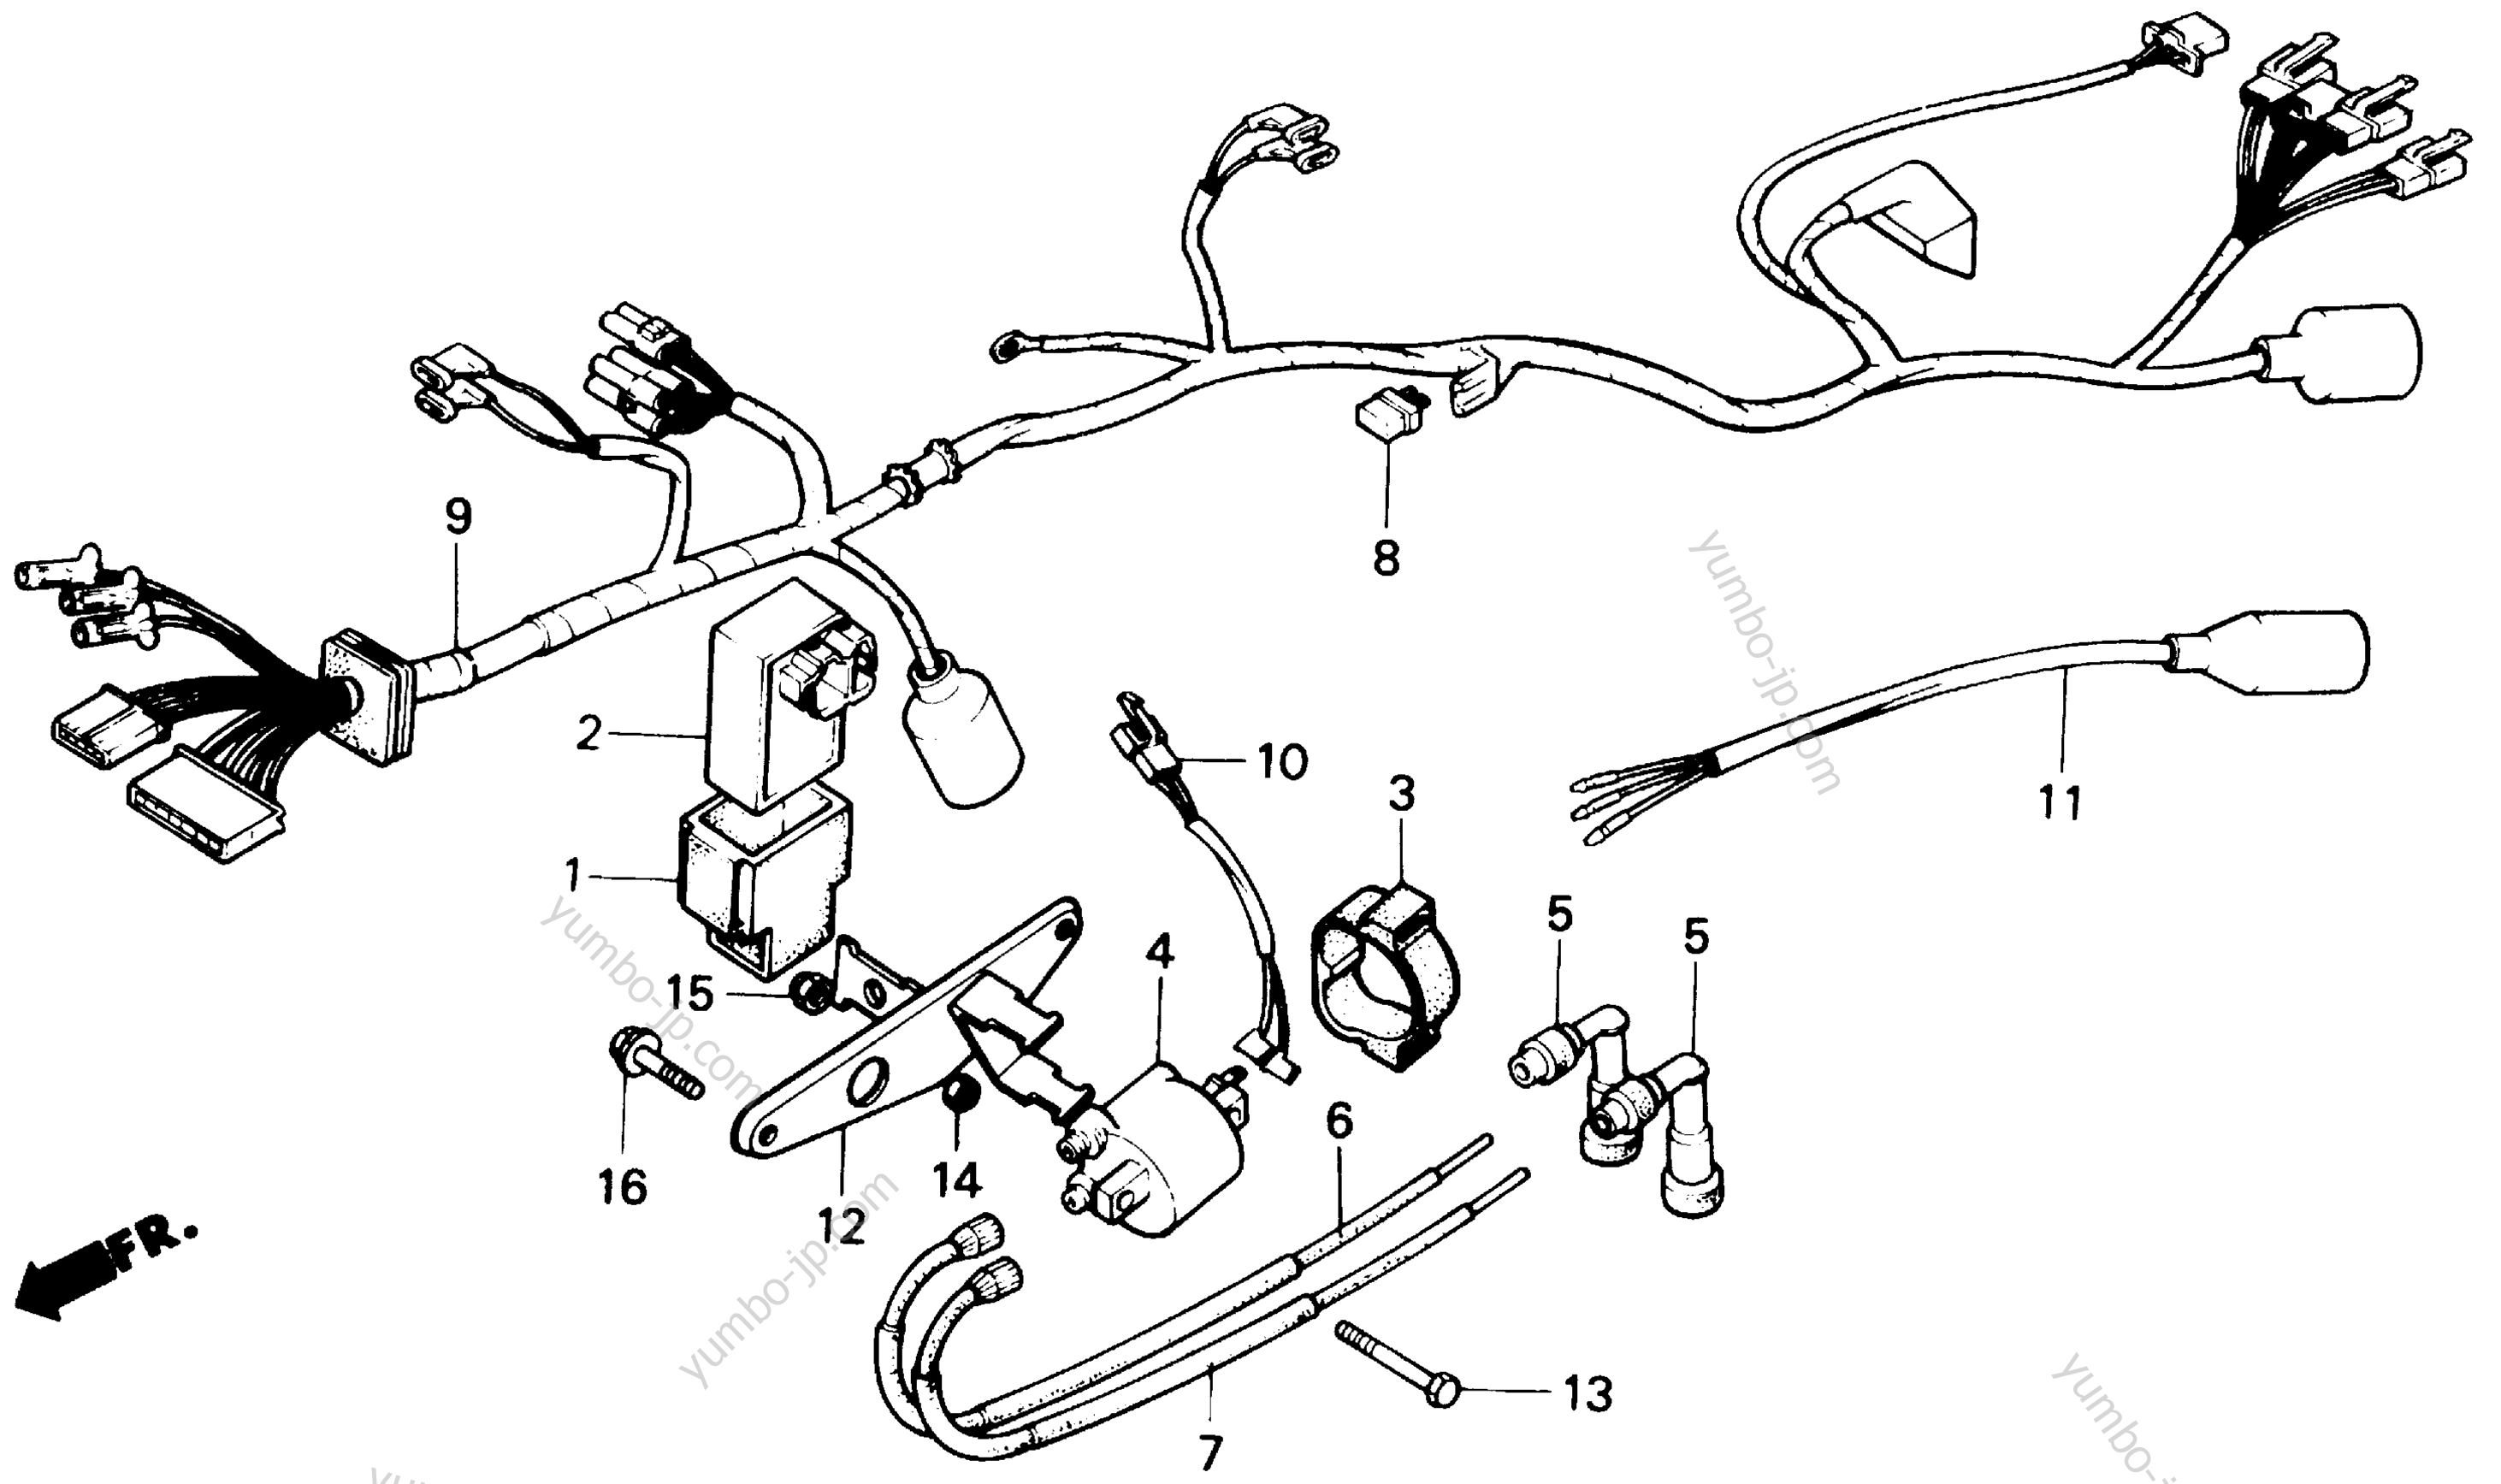 WIRE HARNESS for motorcycles HONDA CMX450C A 1987 year